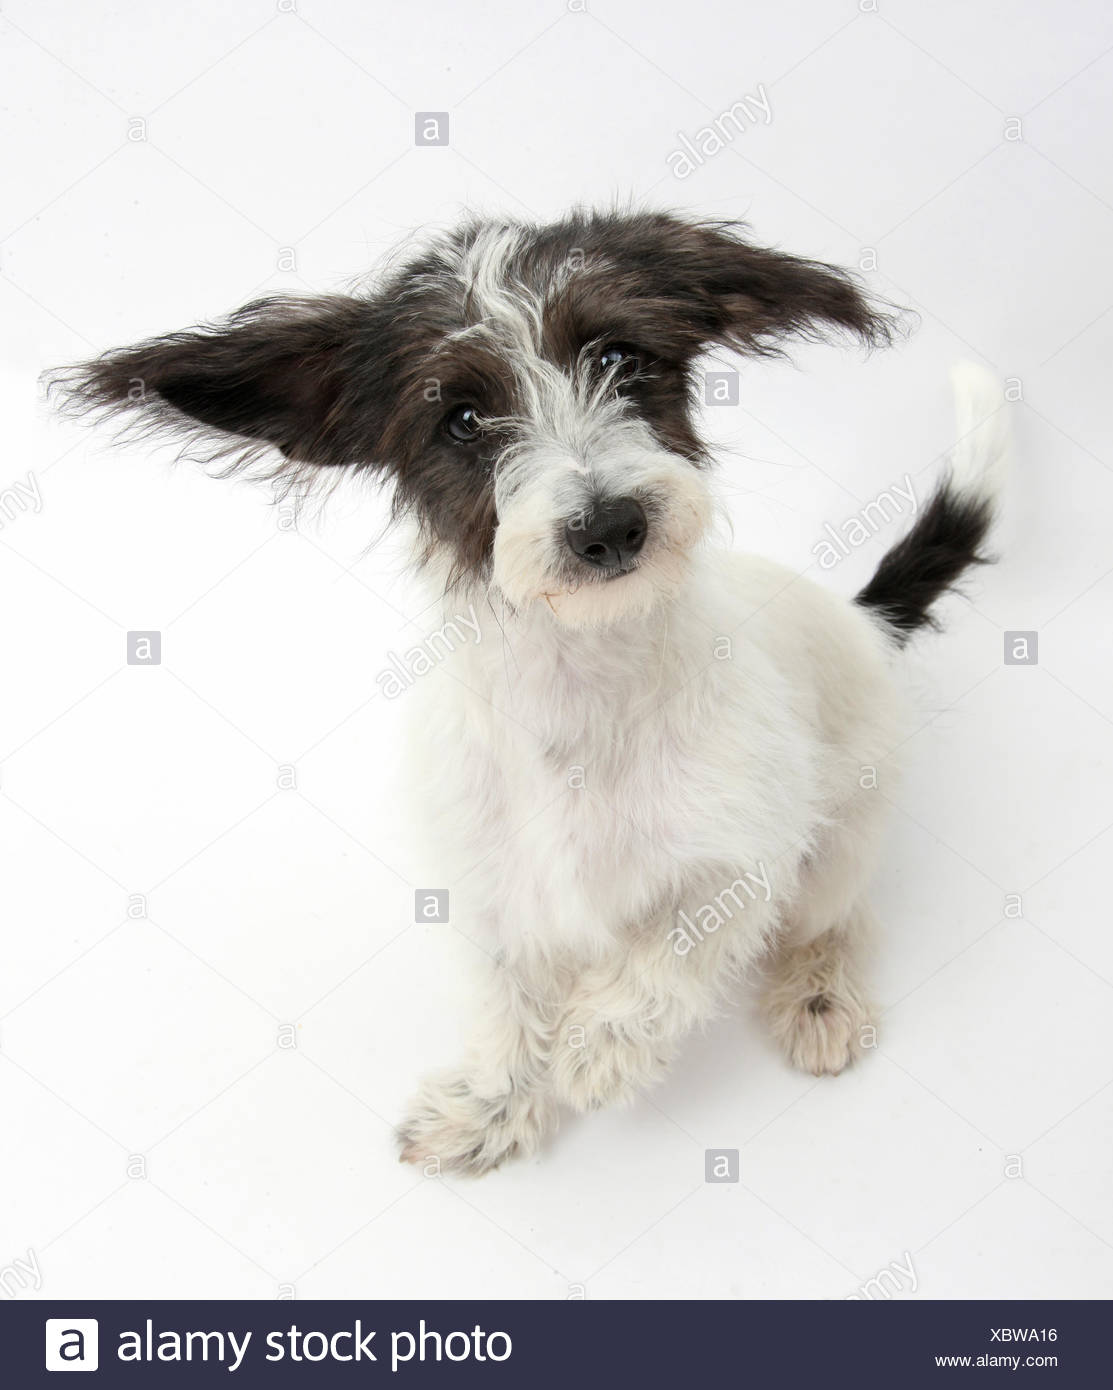 Black And White Jack A Poo Jack Russell Cross Poodle Puppy Stock Photo Alamy